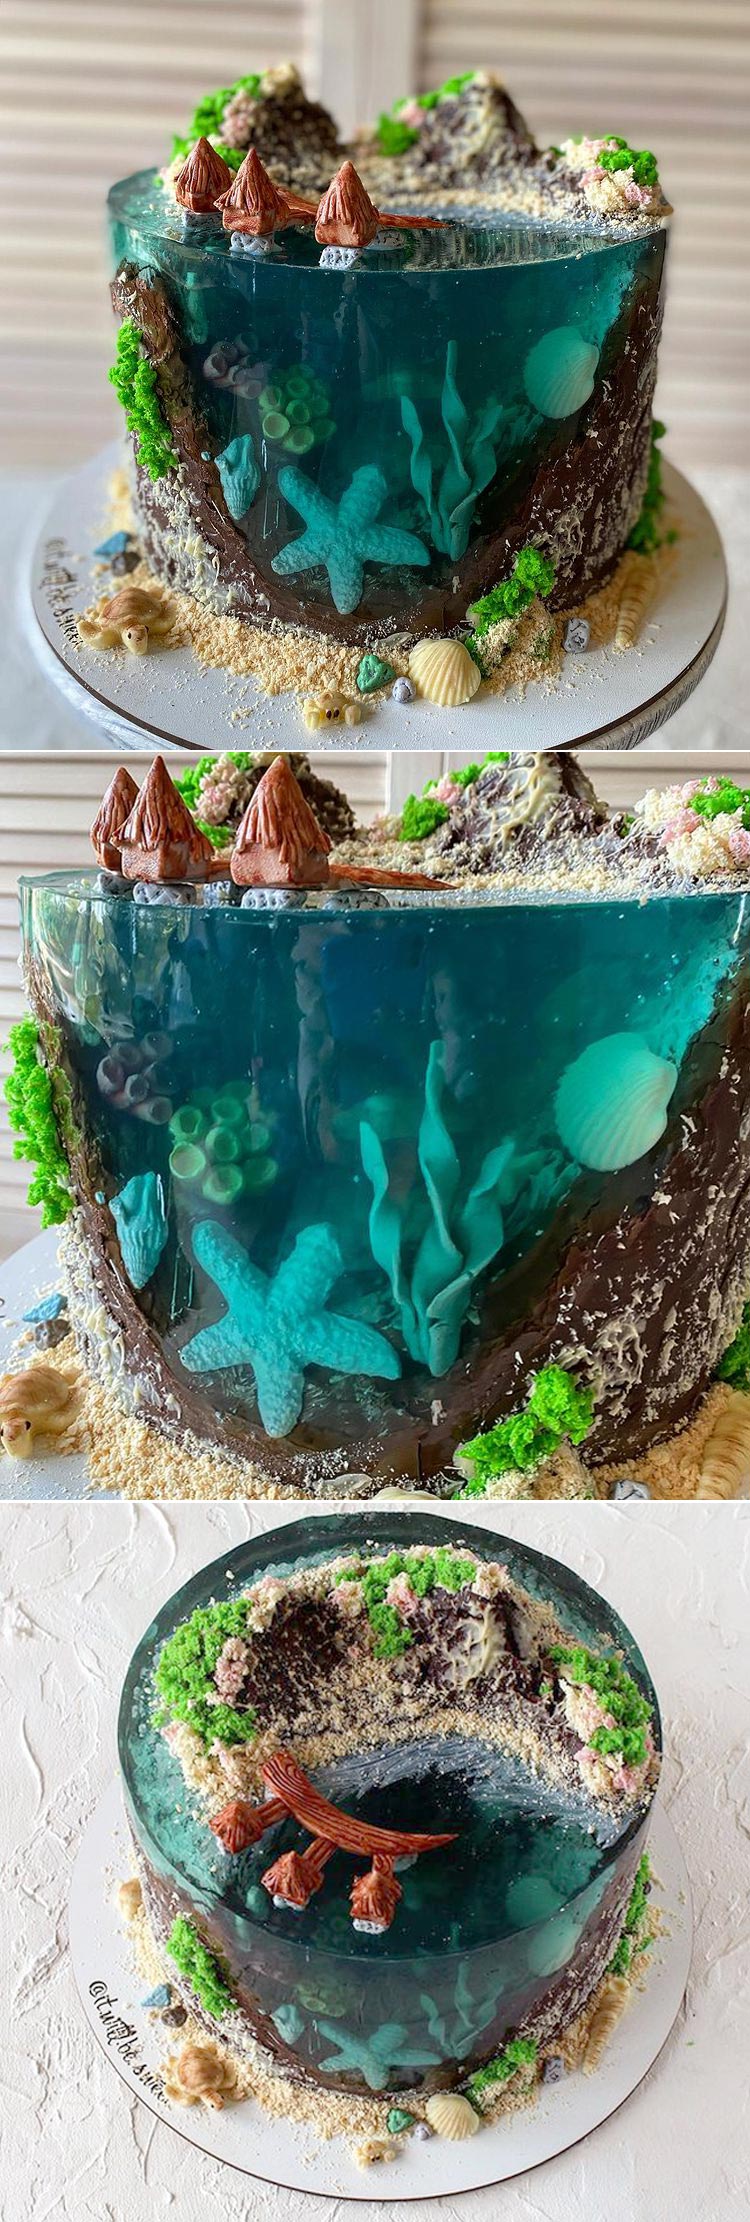 In the absence of vacations in 2020, bakers come up with "Island Cake